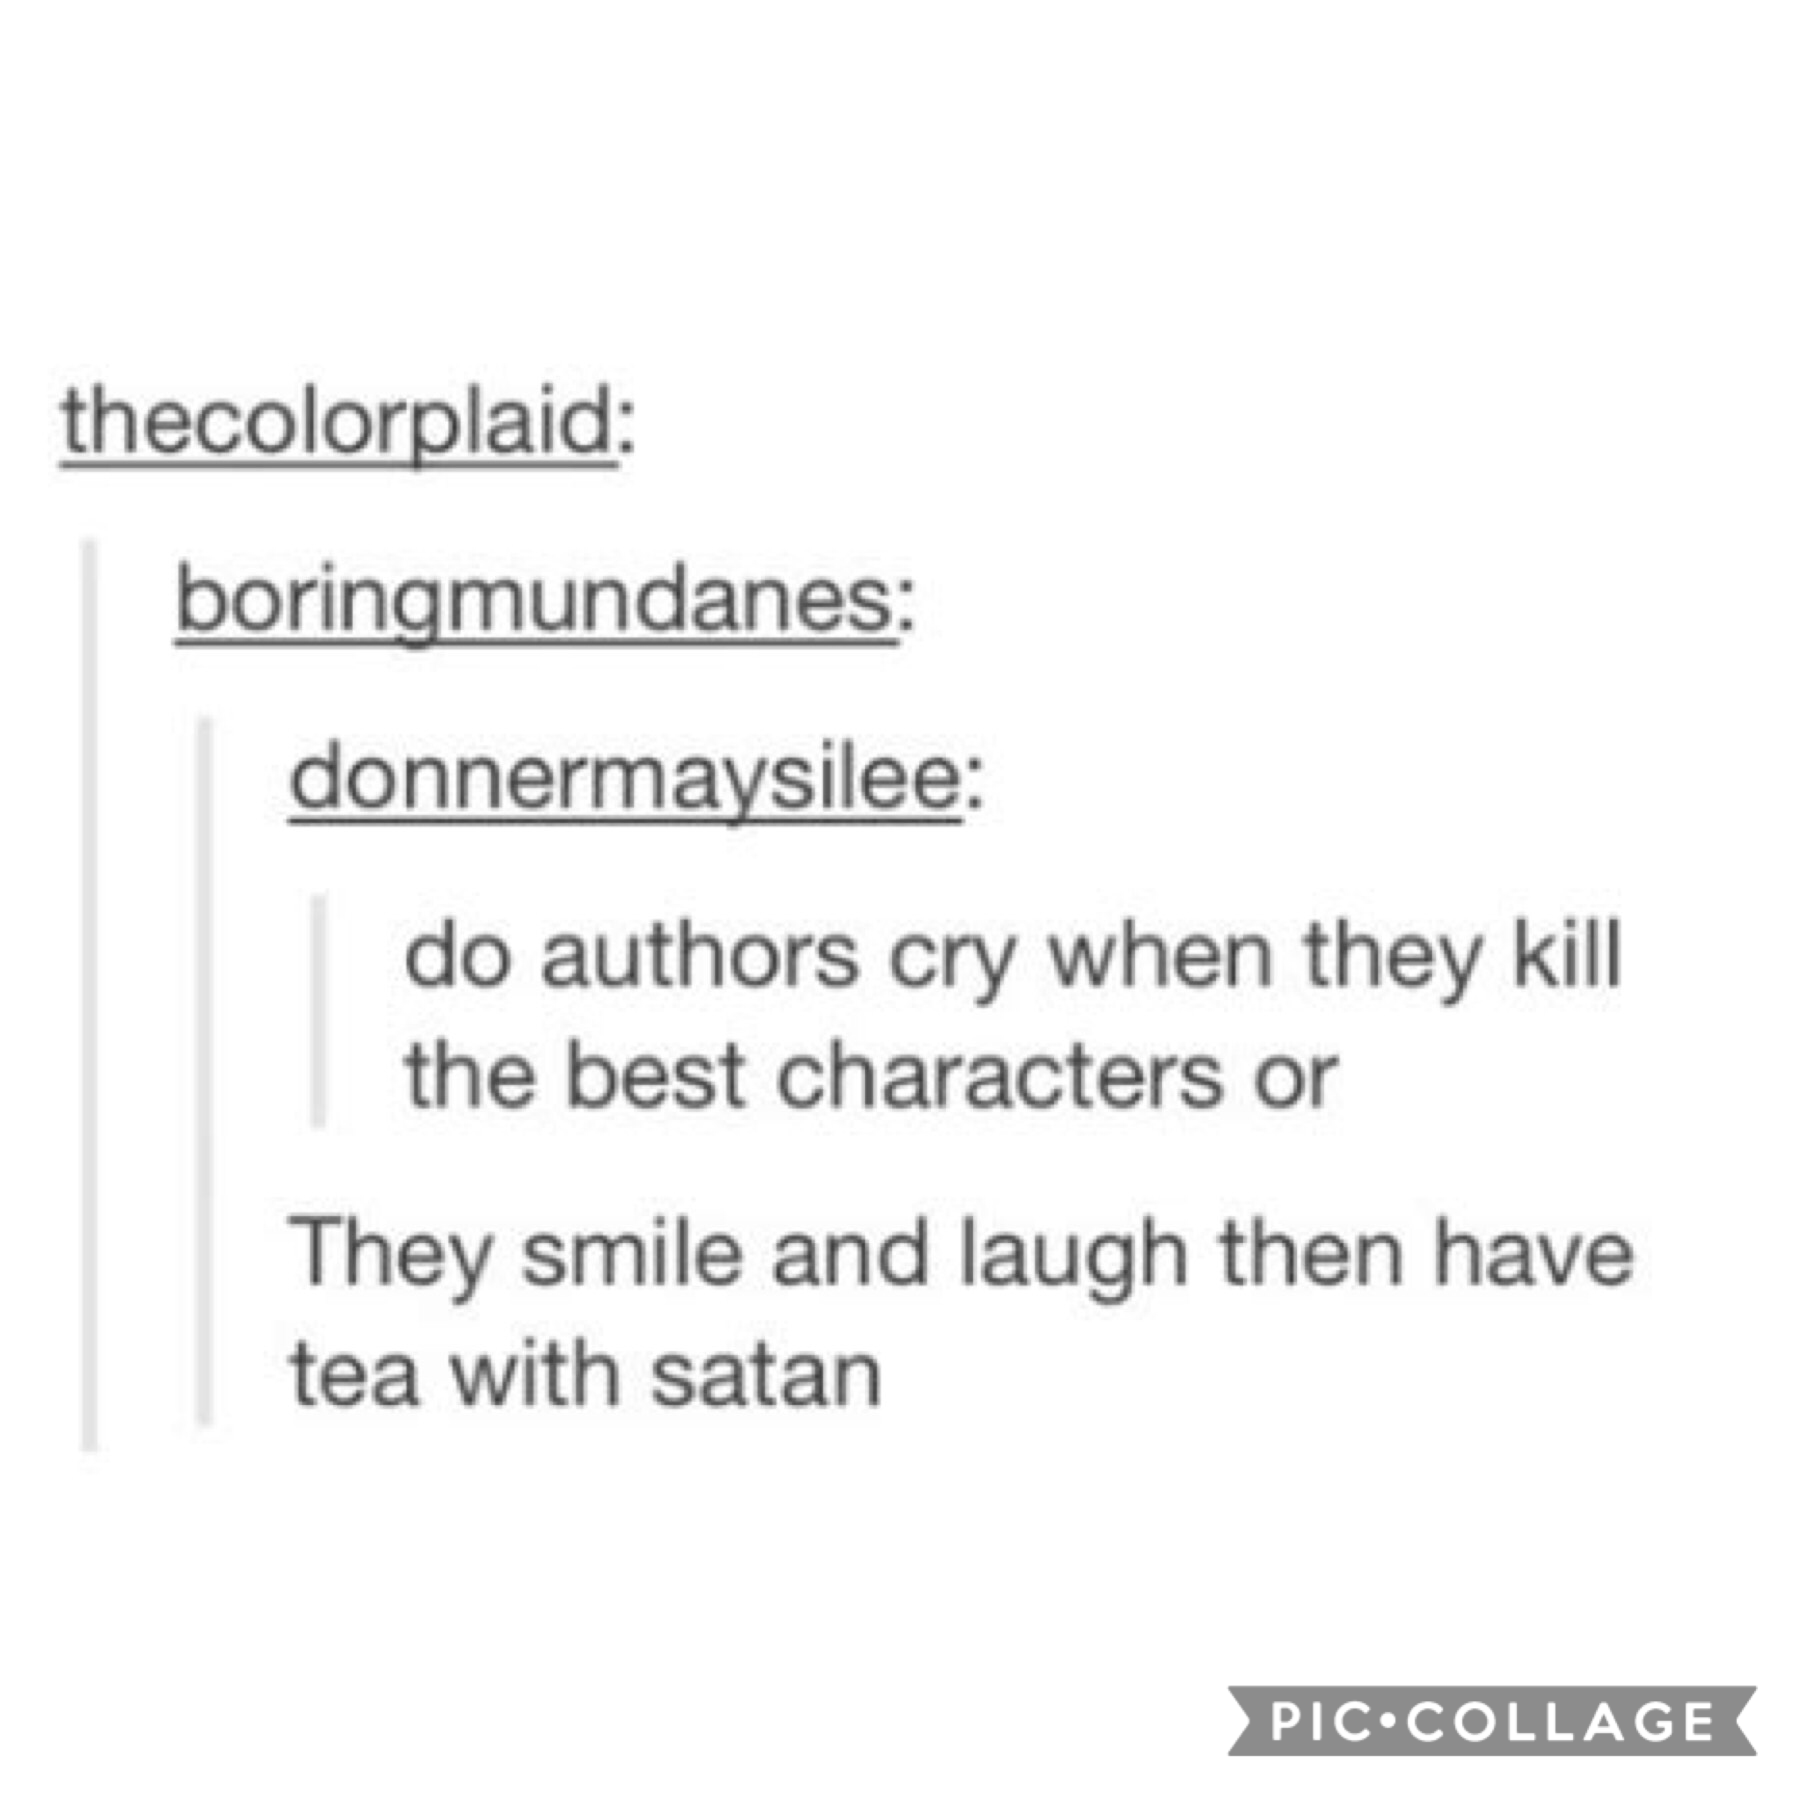 they smile and laugh and have tea with satan. case closed🌝😤 how can the authors withstand to break our hearts? liKE no thank you, I would prefer to not have my heart shattered into a million pieces.
k, thanks👌🏼💓